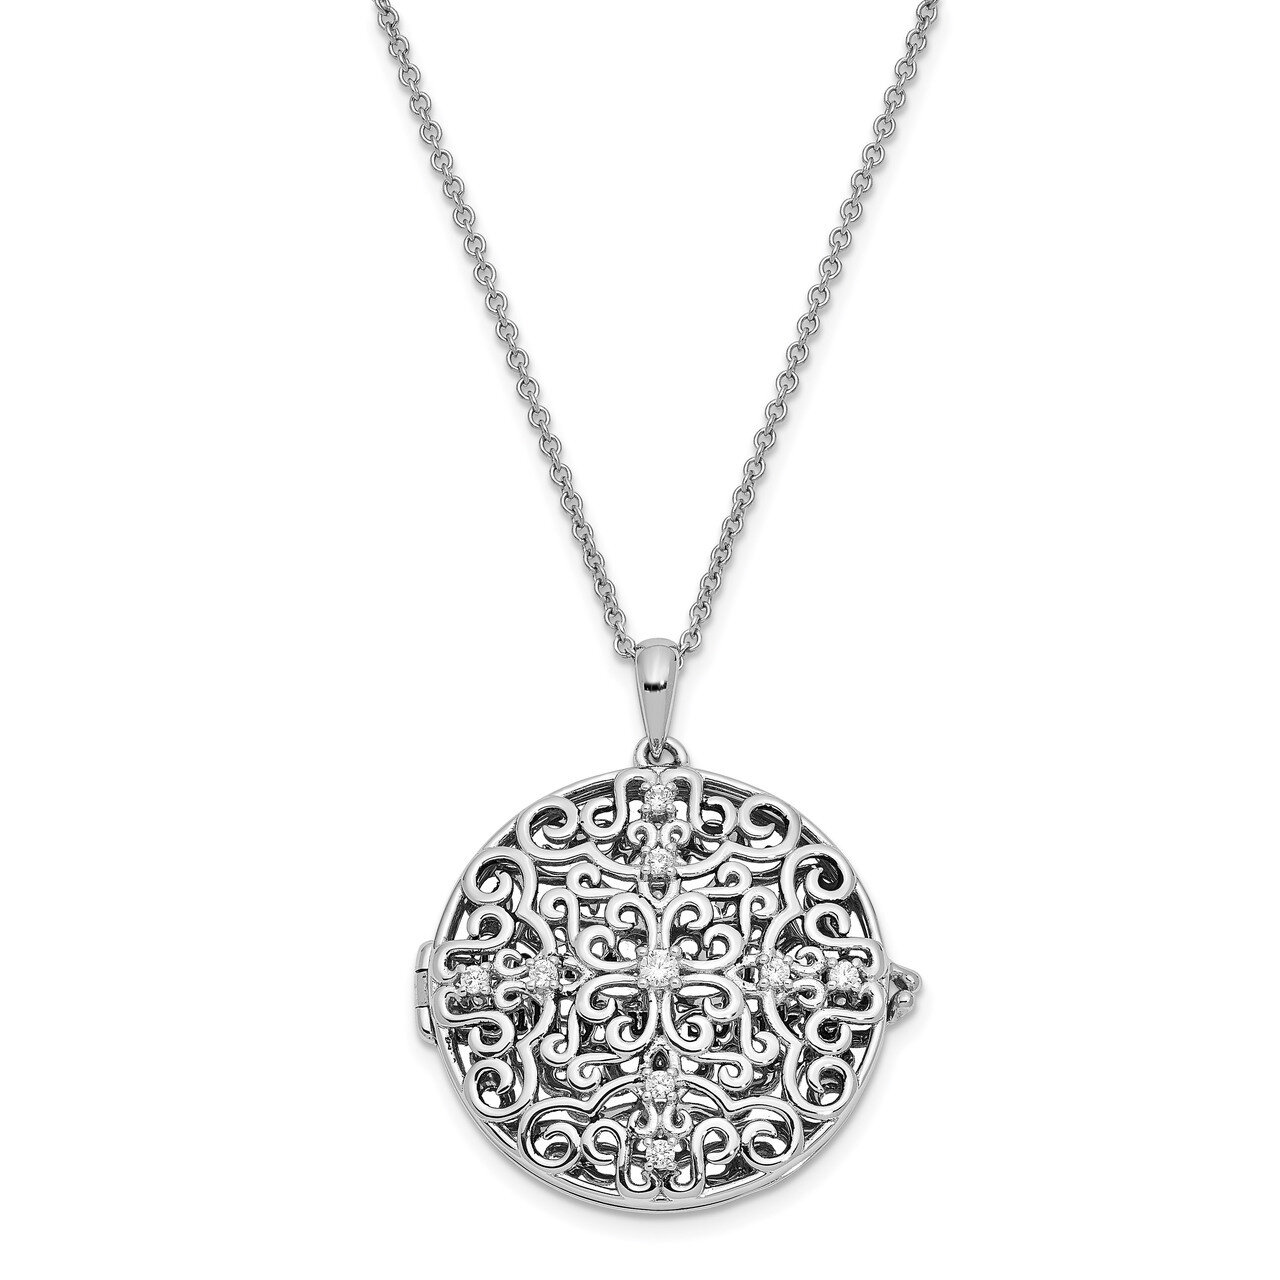 Antiqued Do Not Let Anyone Dull 18 Inch Necklace Sterling Silver CZ Diamond QSX628